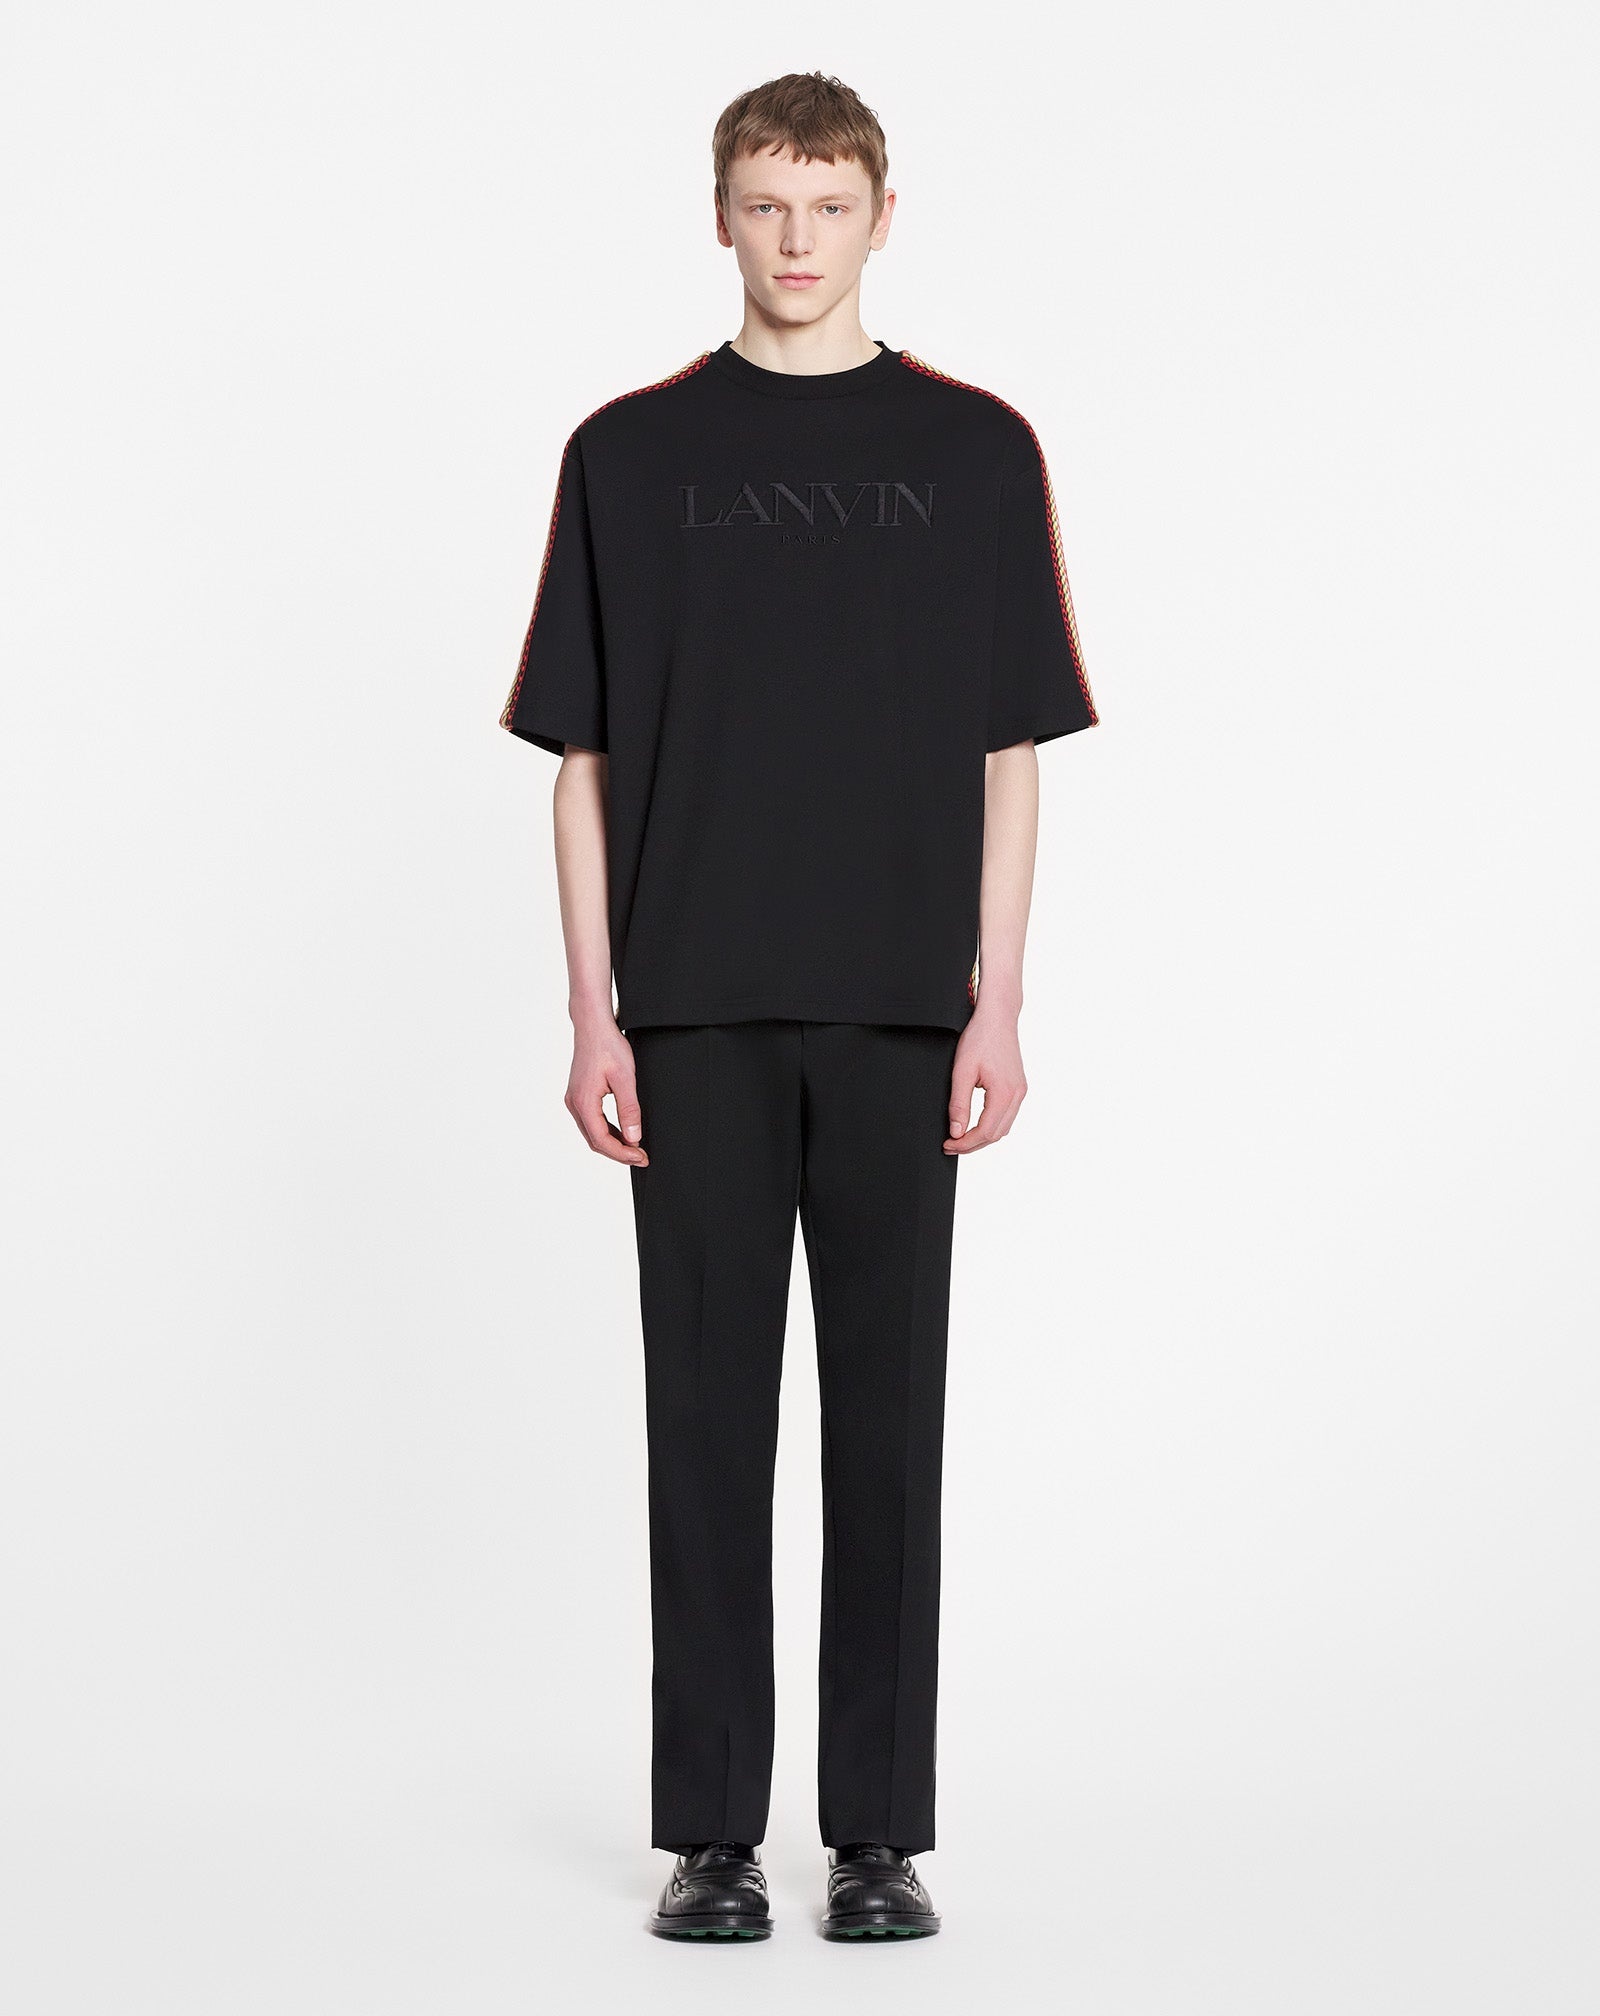 LANVIN OVERSIZED EMBROIDERED SIDE CURB T-SHIRT - 2